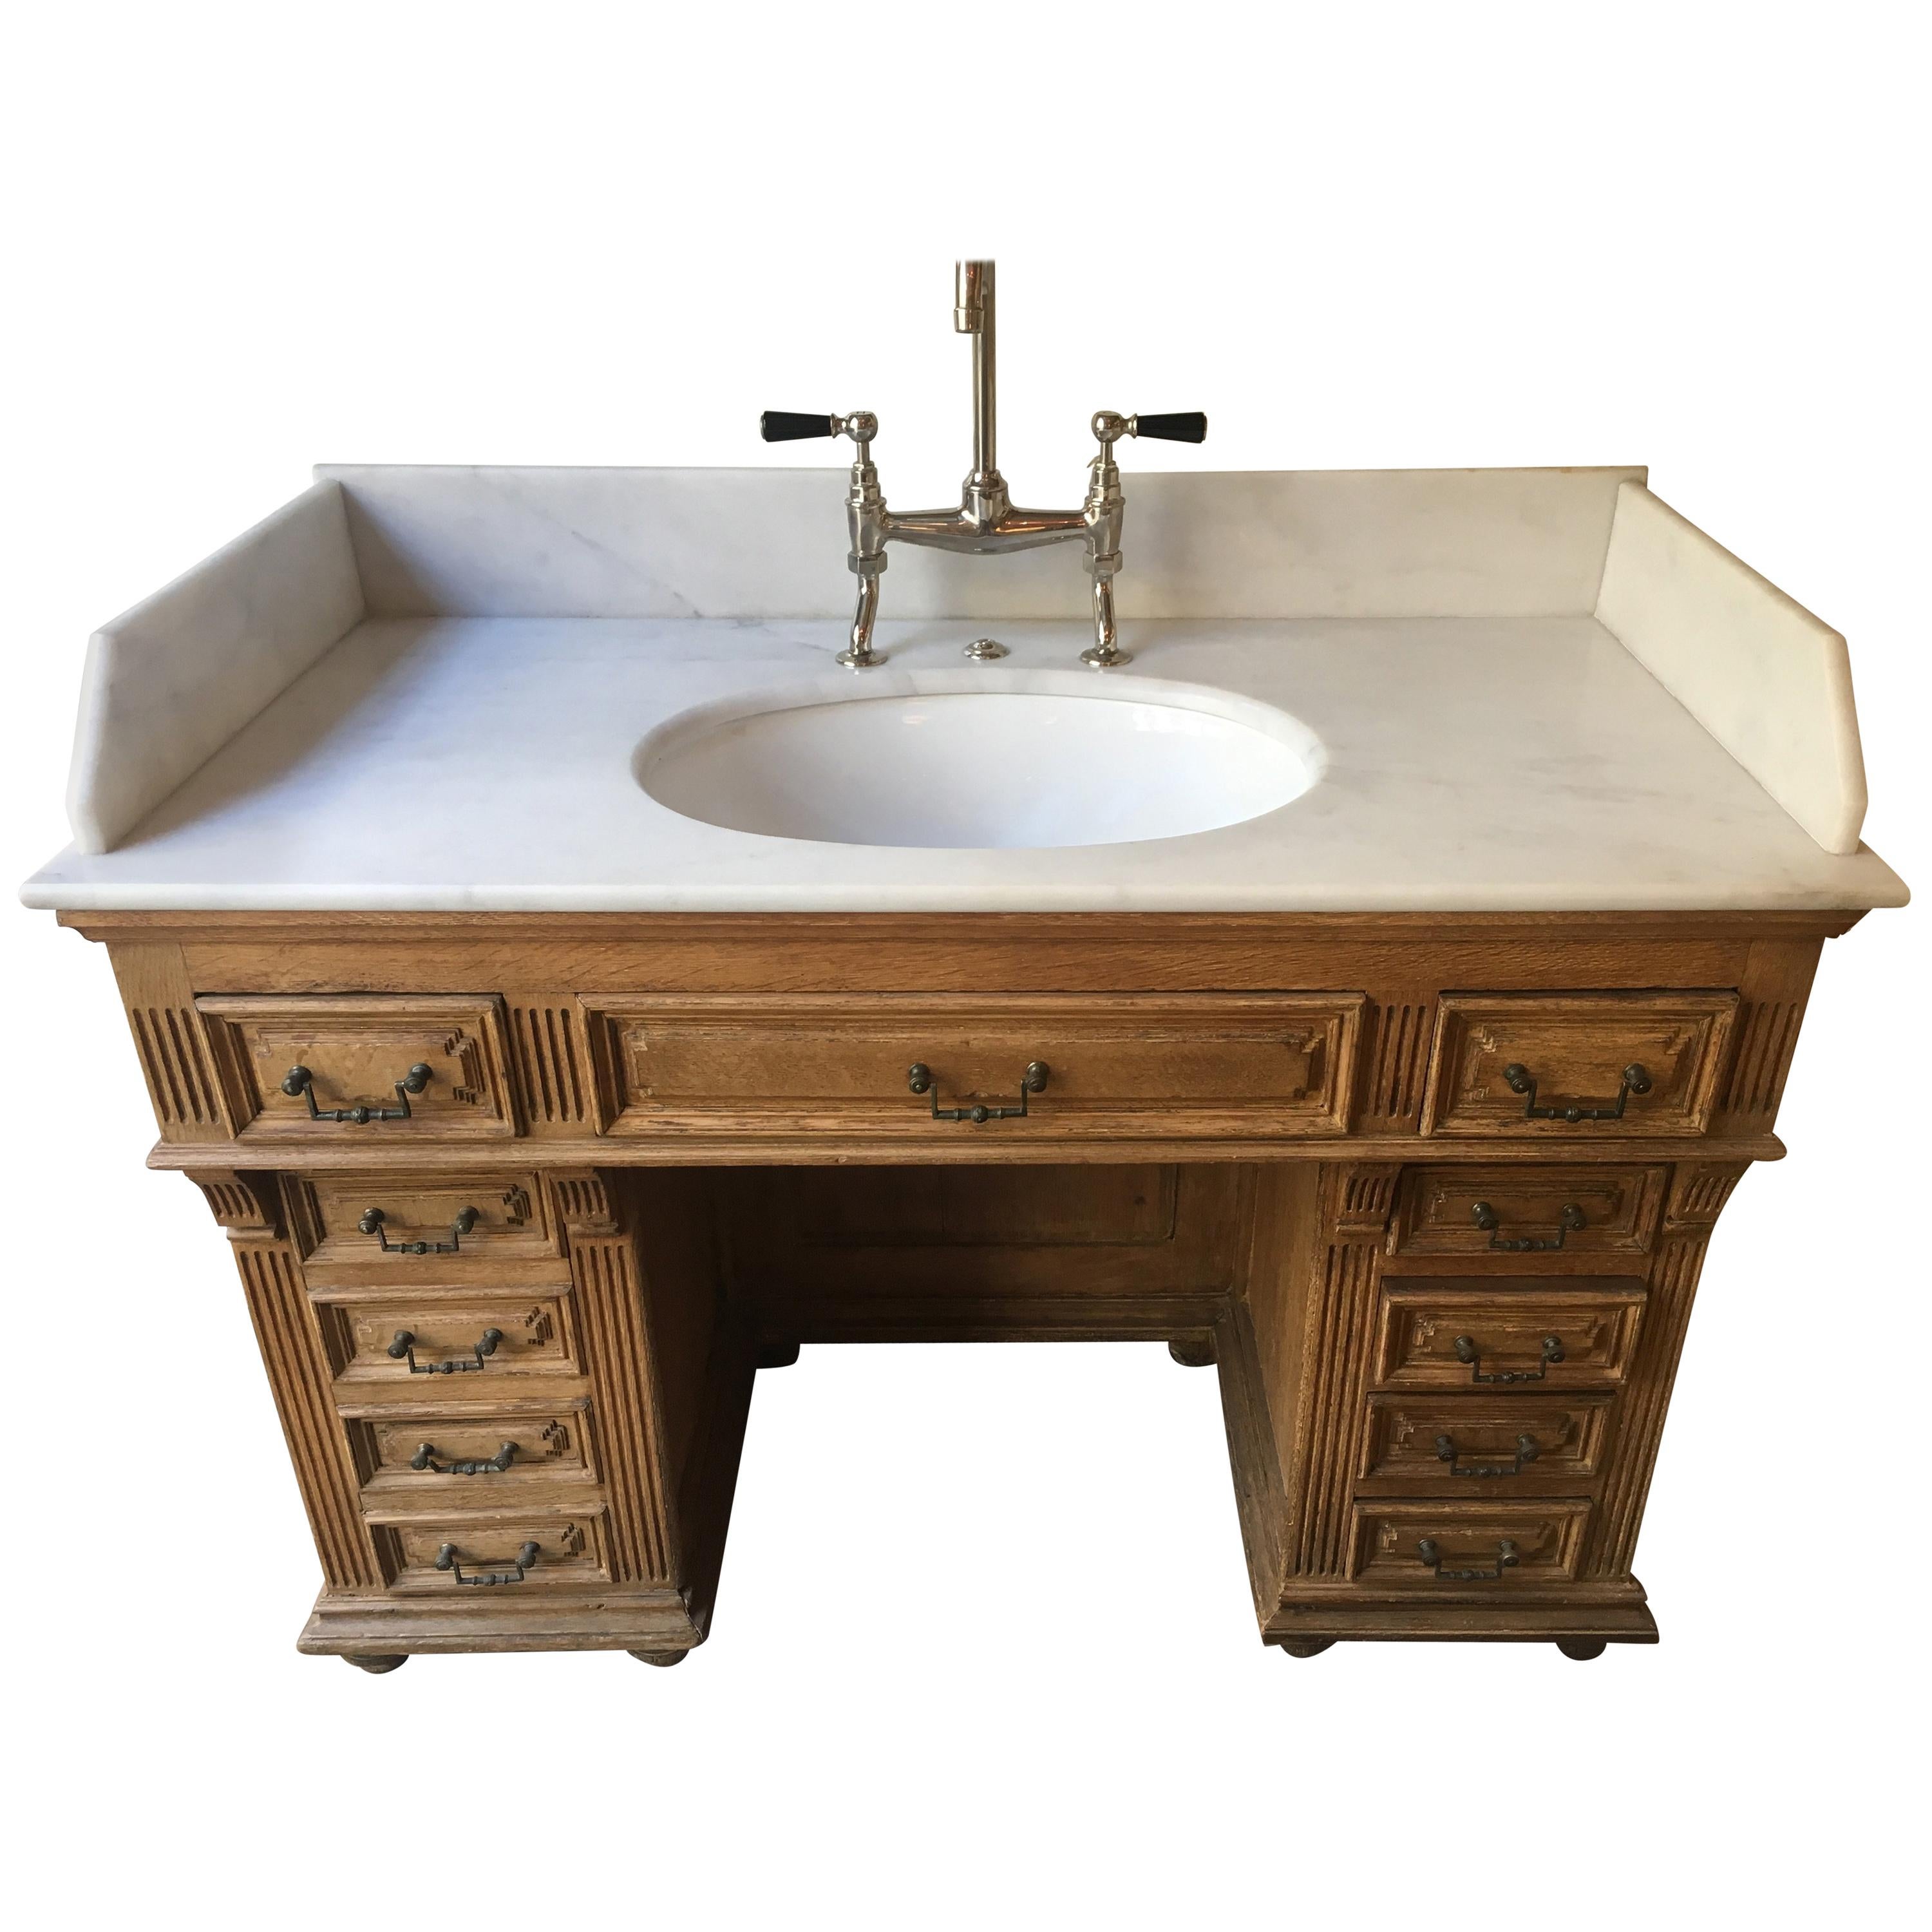 19th Century French Oak Cupboard Sink with Drawers and Carrara Marble Top, 1890s